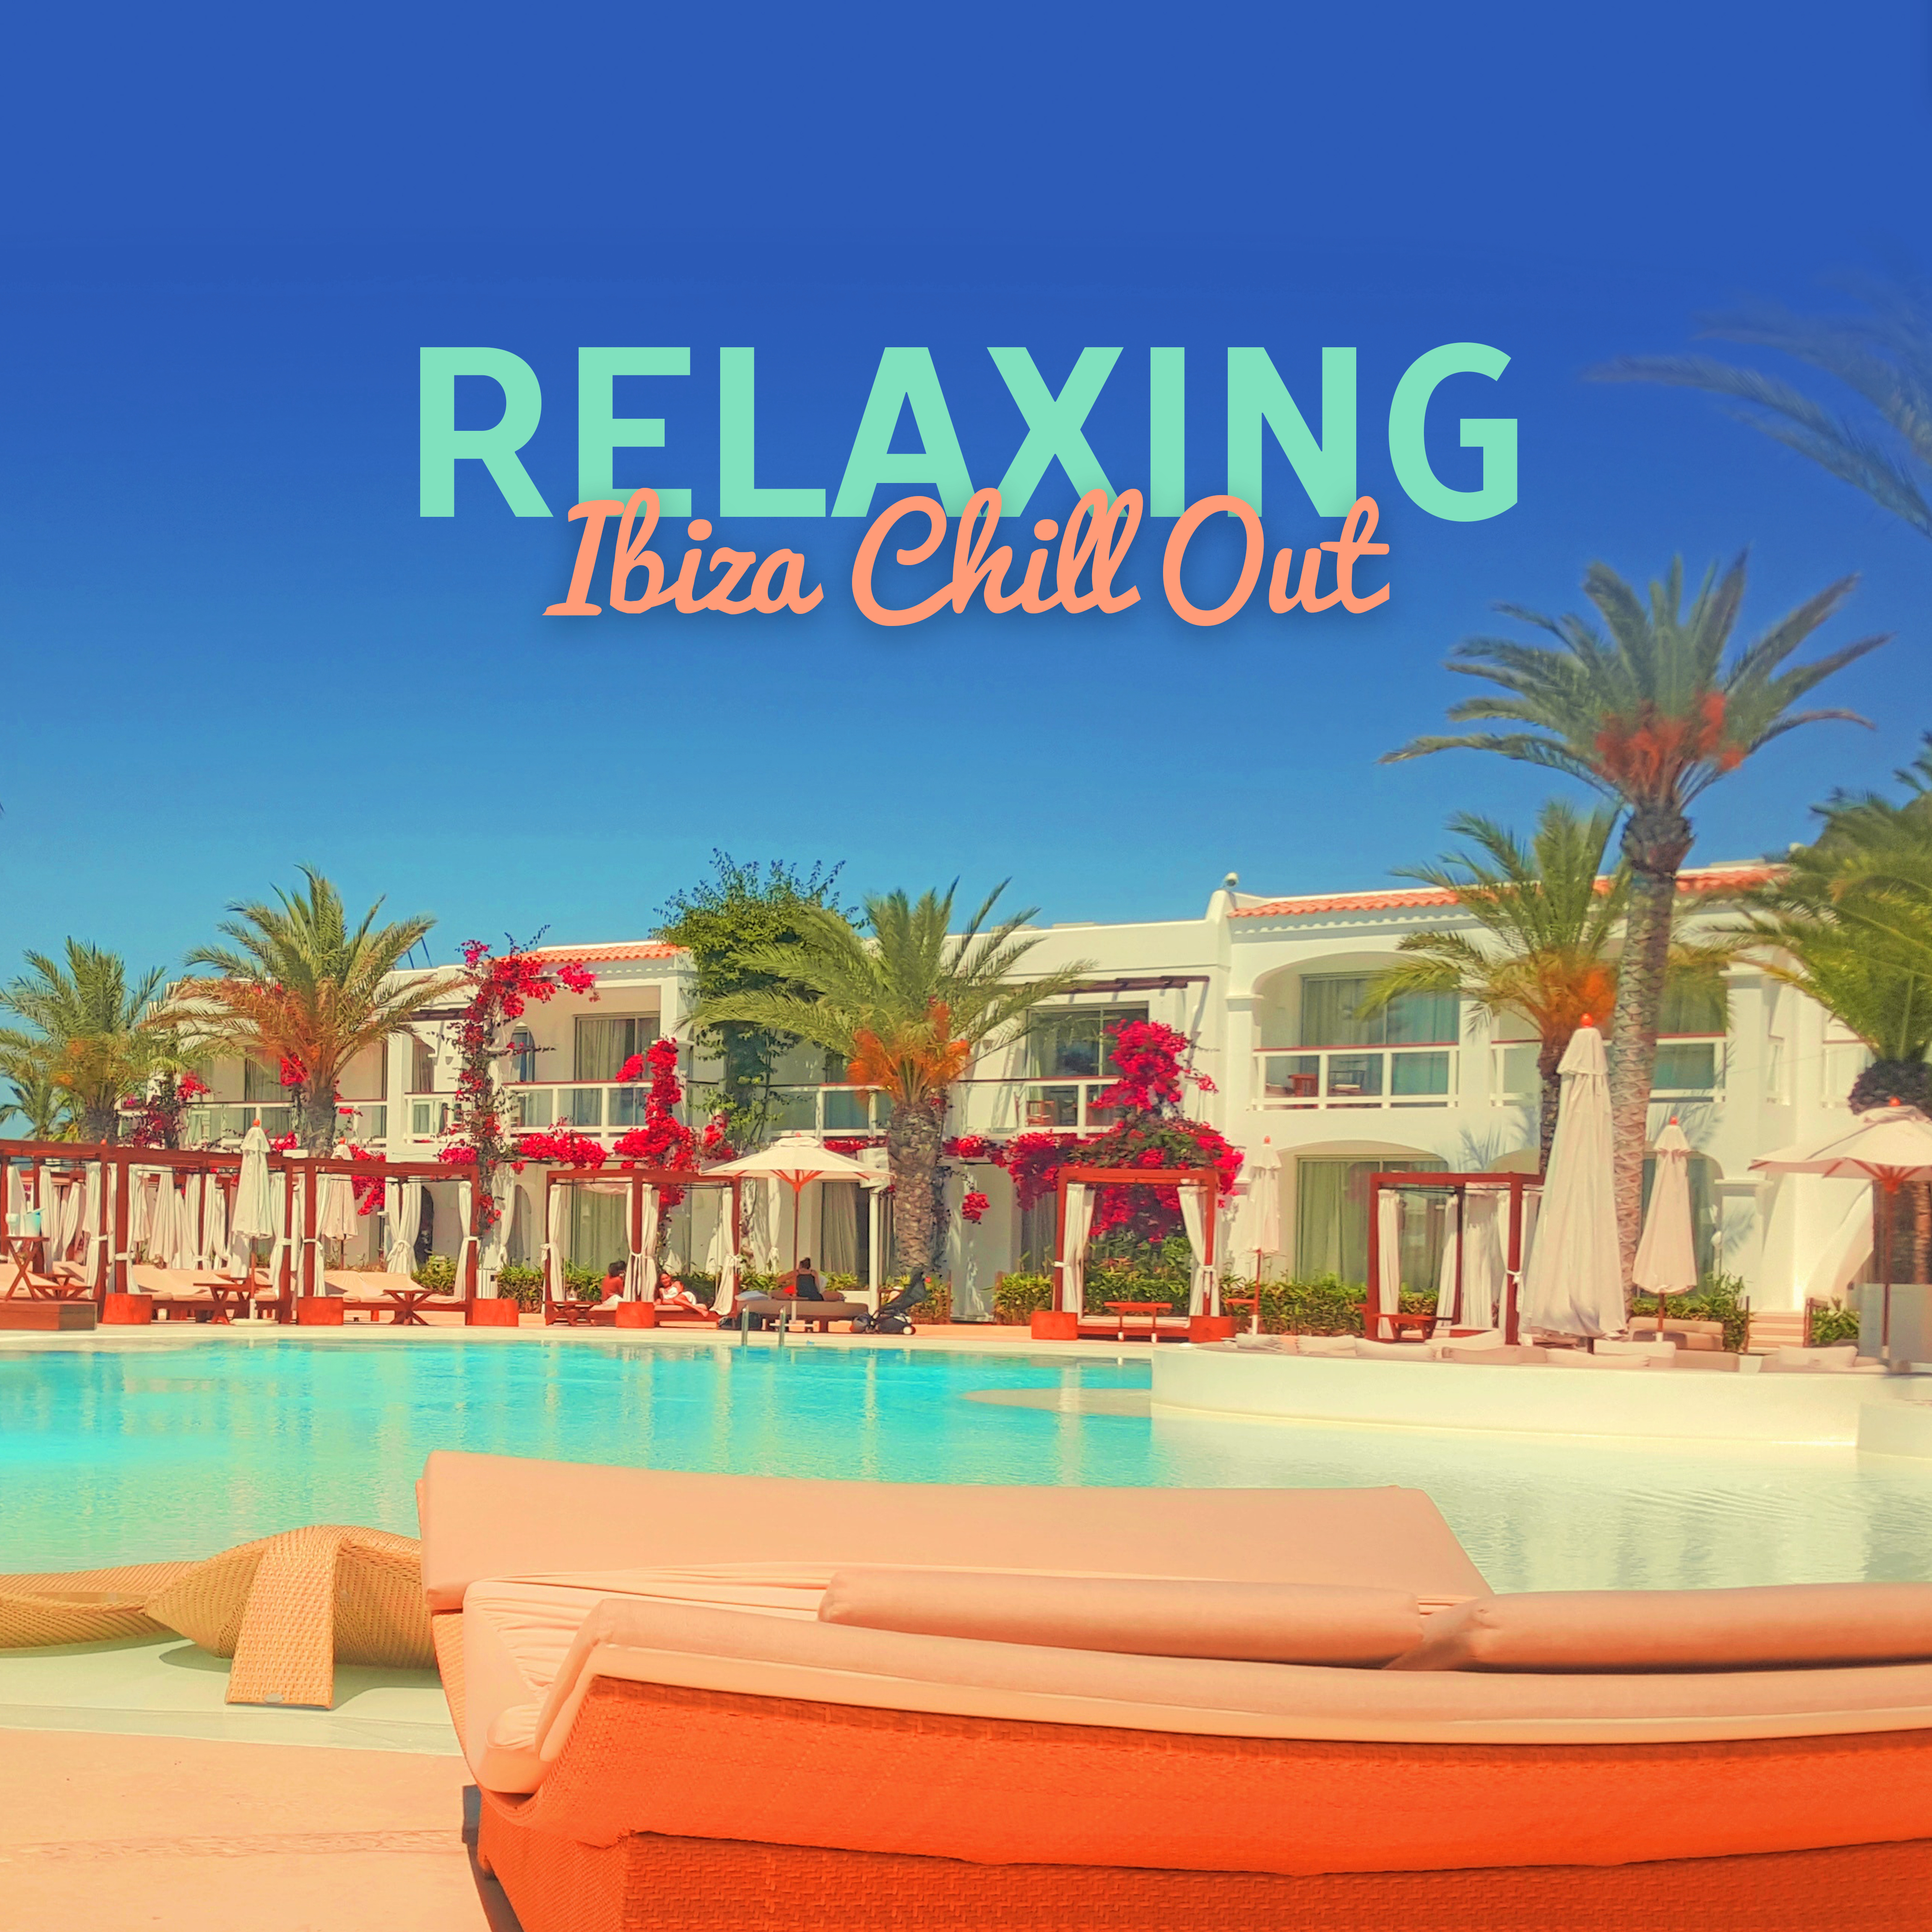 Relaxing Ibiza Chill Out  Soft Sounds to Relax, Beach Lounge, Hot Summer Music, Holiday Vibes